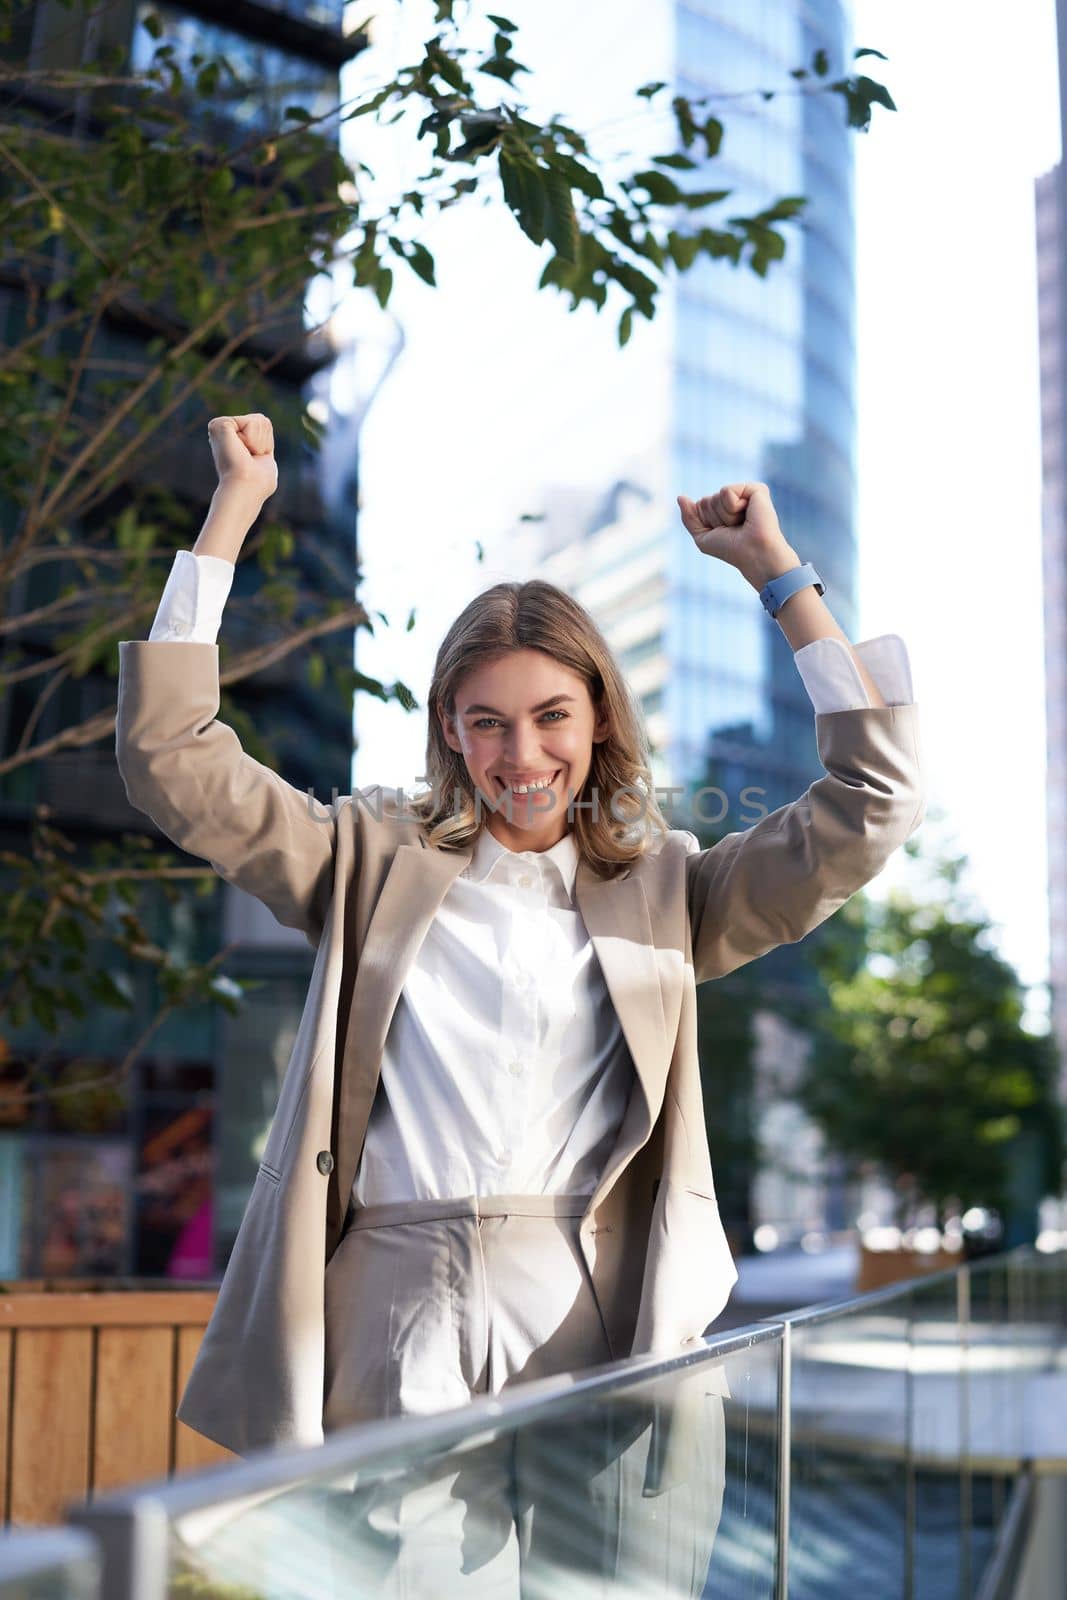 Saleswoman expresses joy and happiness. Businesswoman triumphing on street, raising hands up, celebrating victory, smiling pleased.